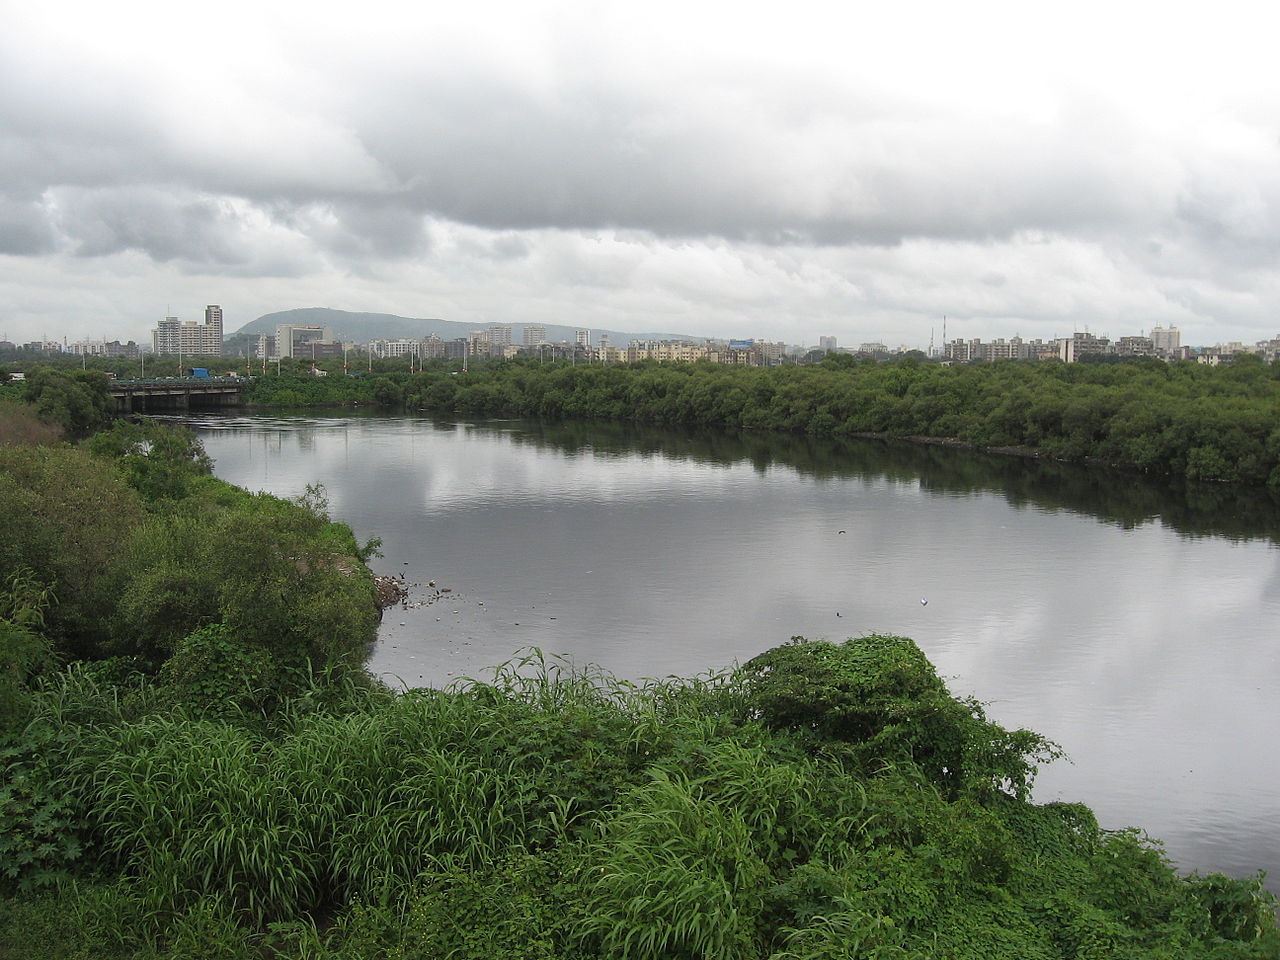 River Mithi that separates suburban and city districts of Mumbai. Image: Nicholas, Wikimedia Commons